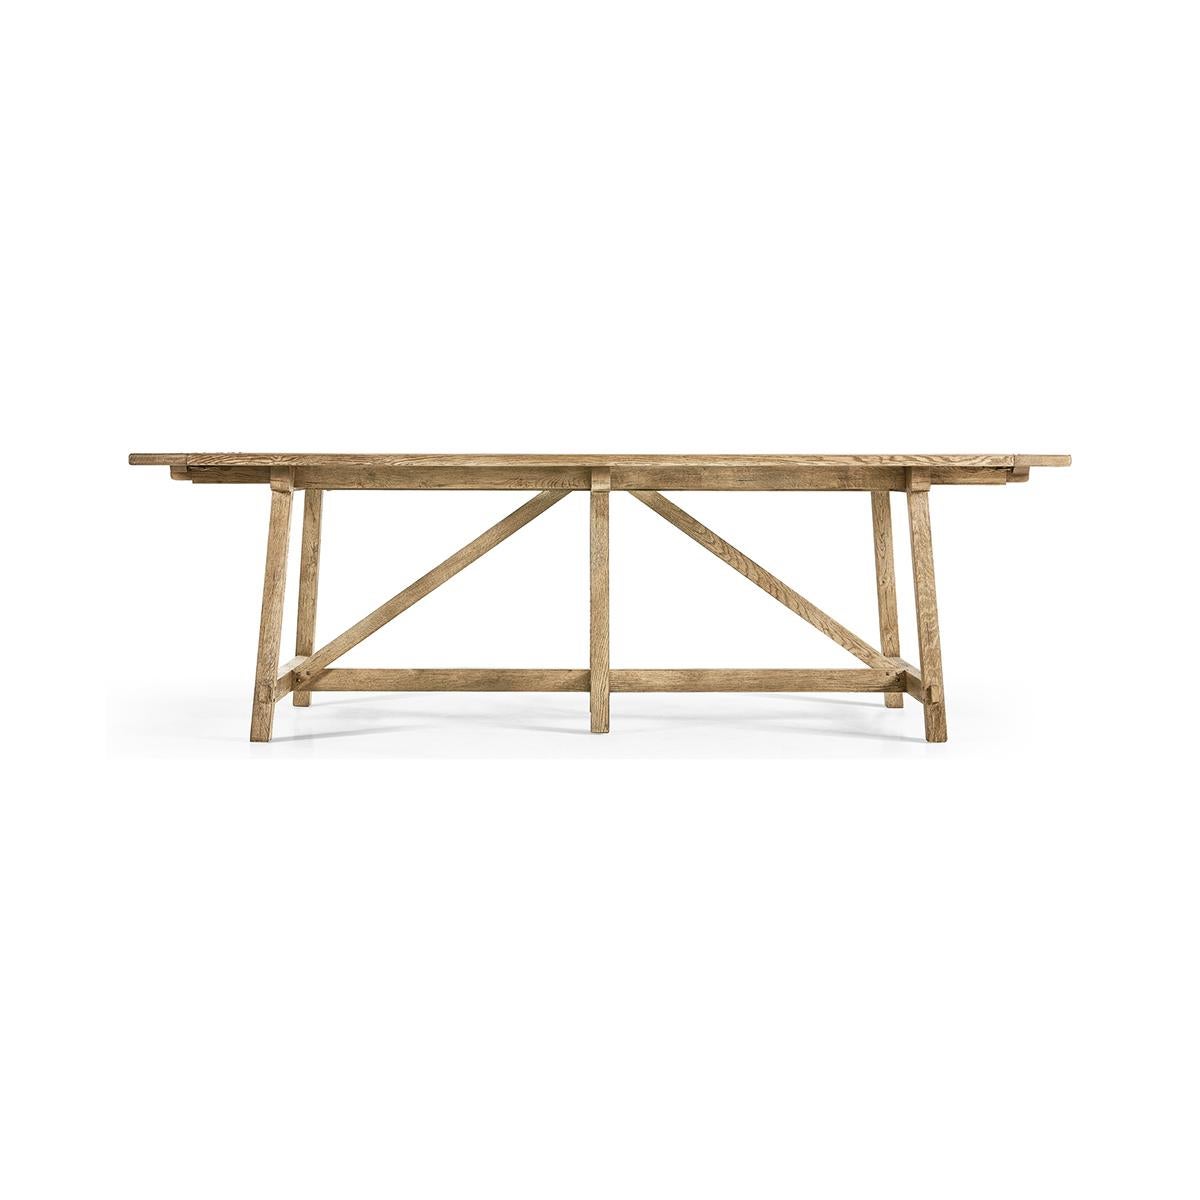 The French Laundry dining table is the perfect combination of unparalleled furniture craftsmanship, elegant functional solutions, and inspiring design. 

Powerful honed forms in stripped Chestnut elicit a raw appreciation for natural materials and